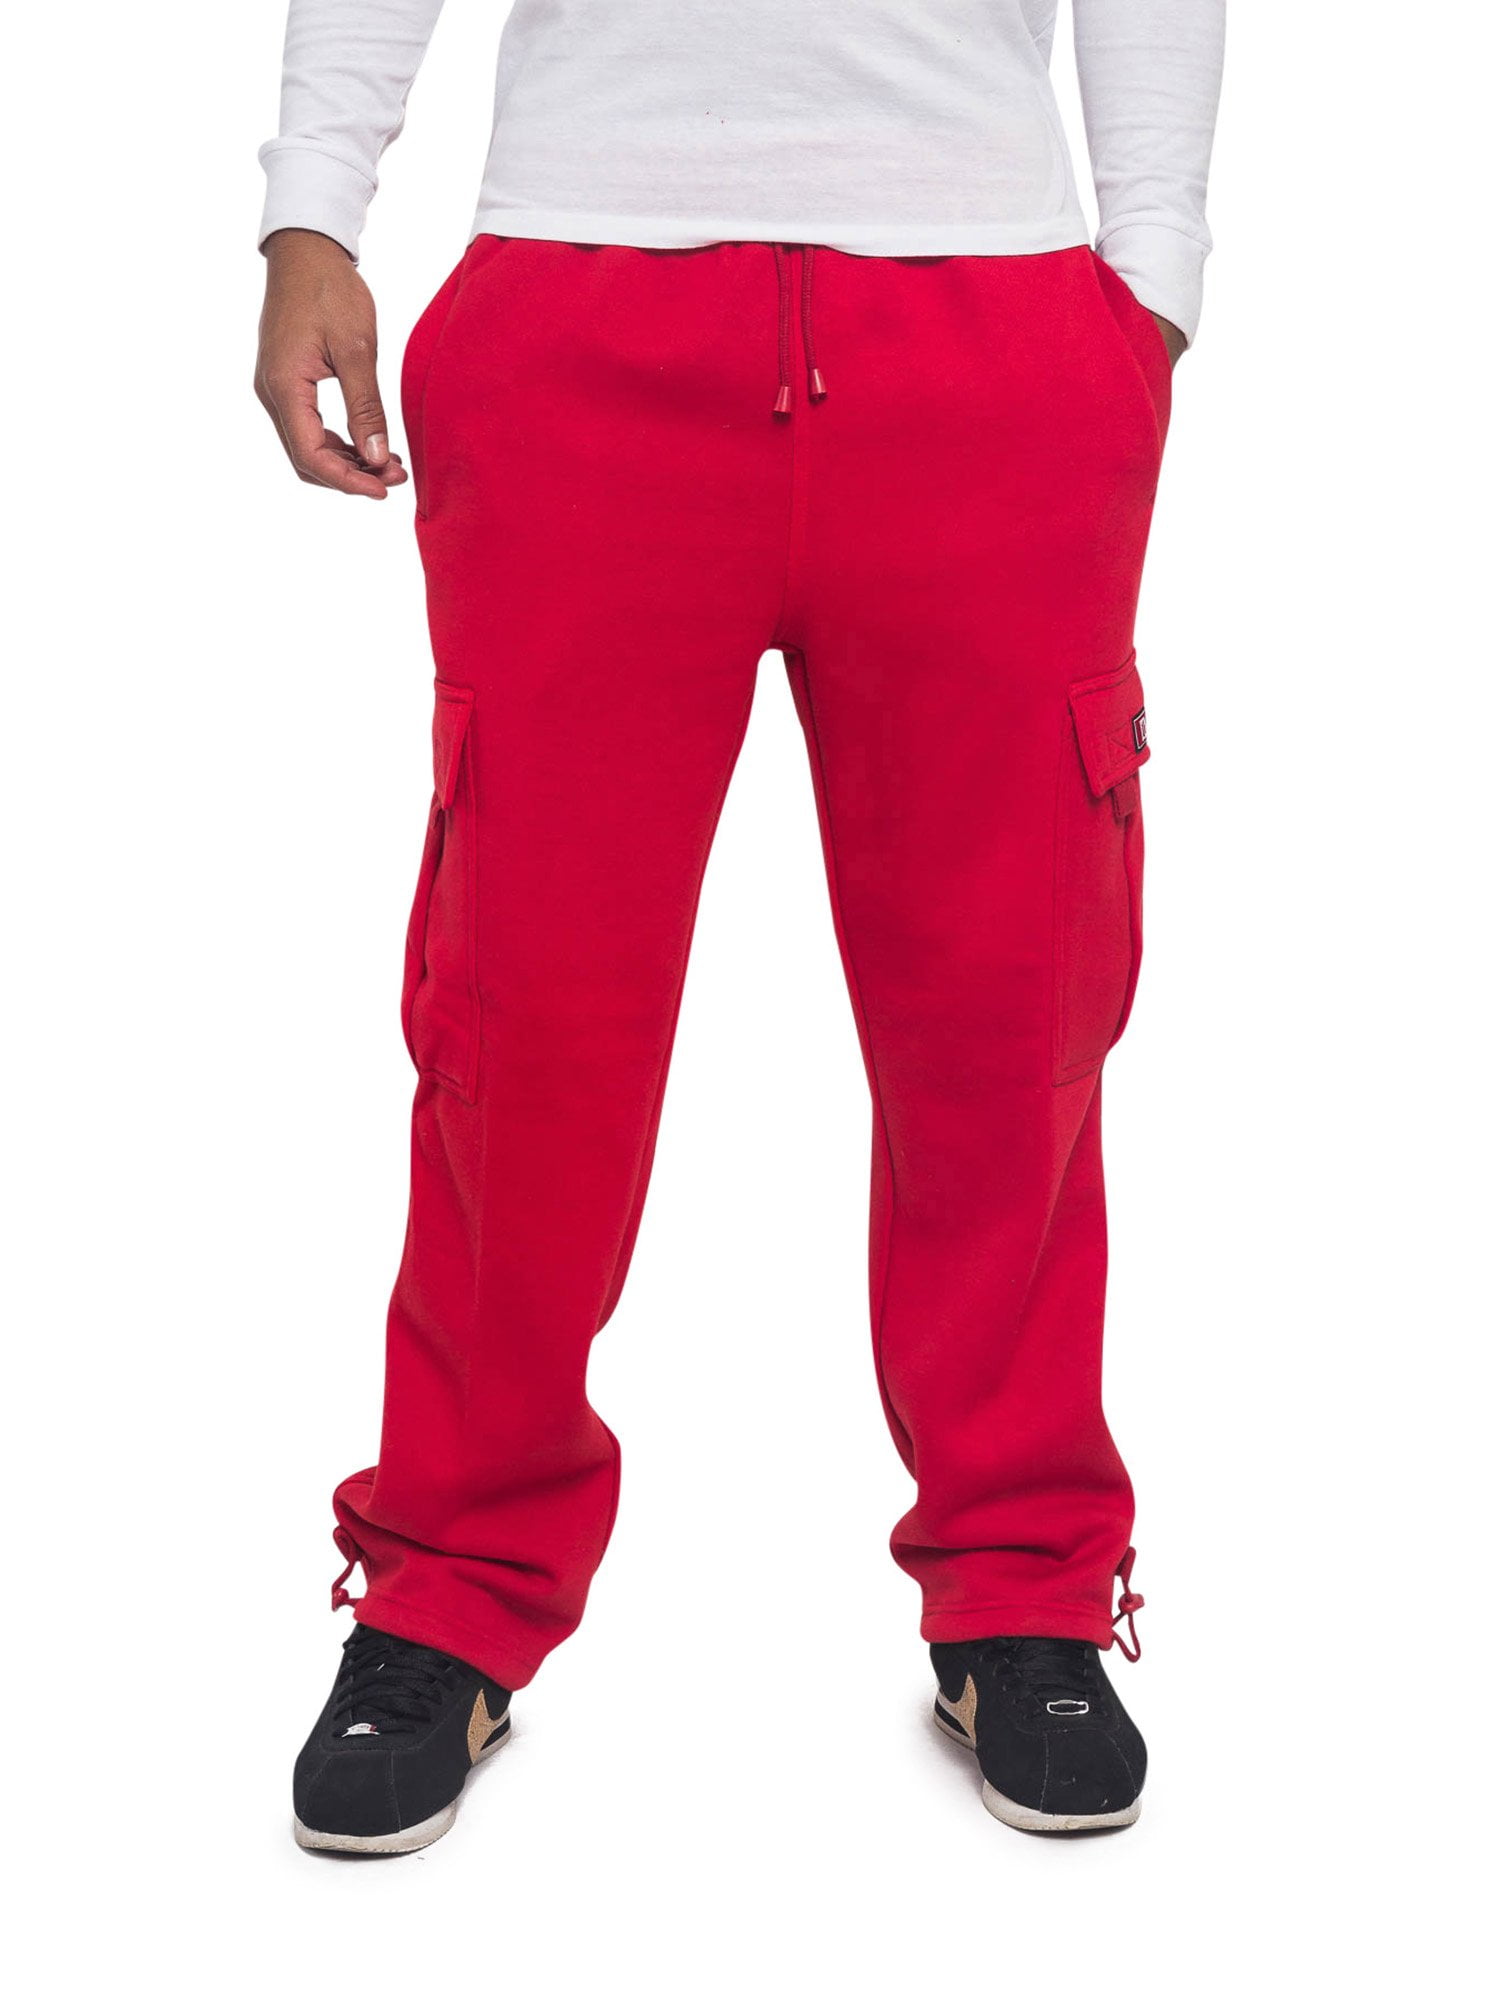 Victorious Men's Essential Flared Stacked Athletic Fleece Sweat Pants FL94